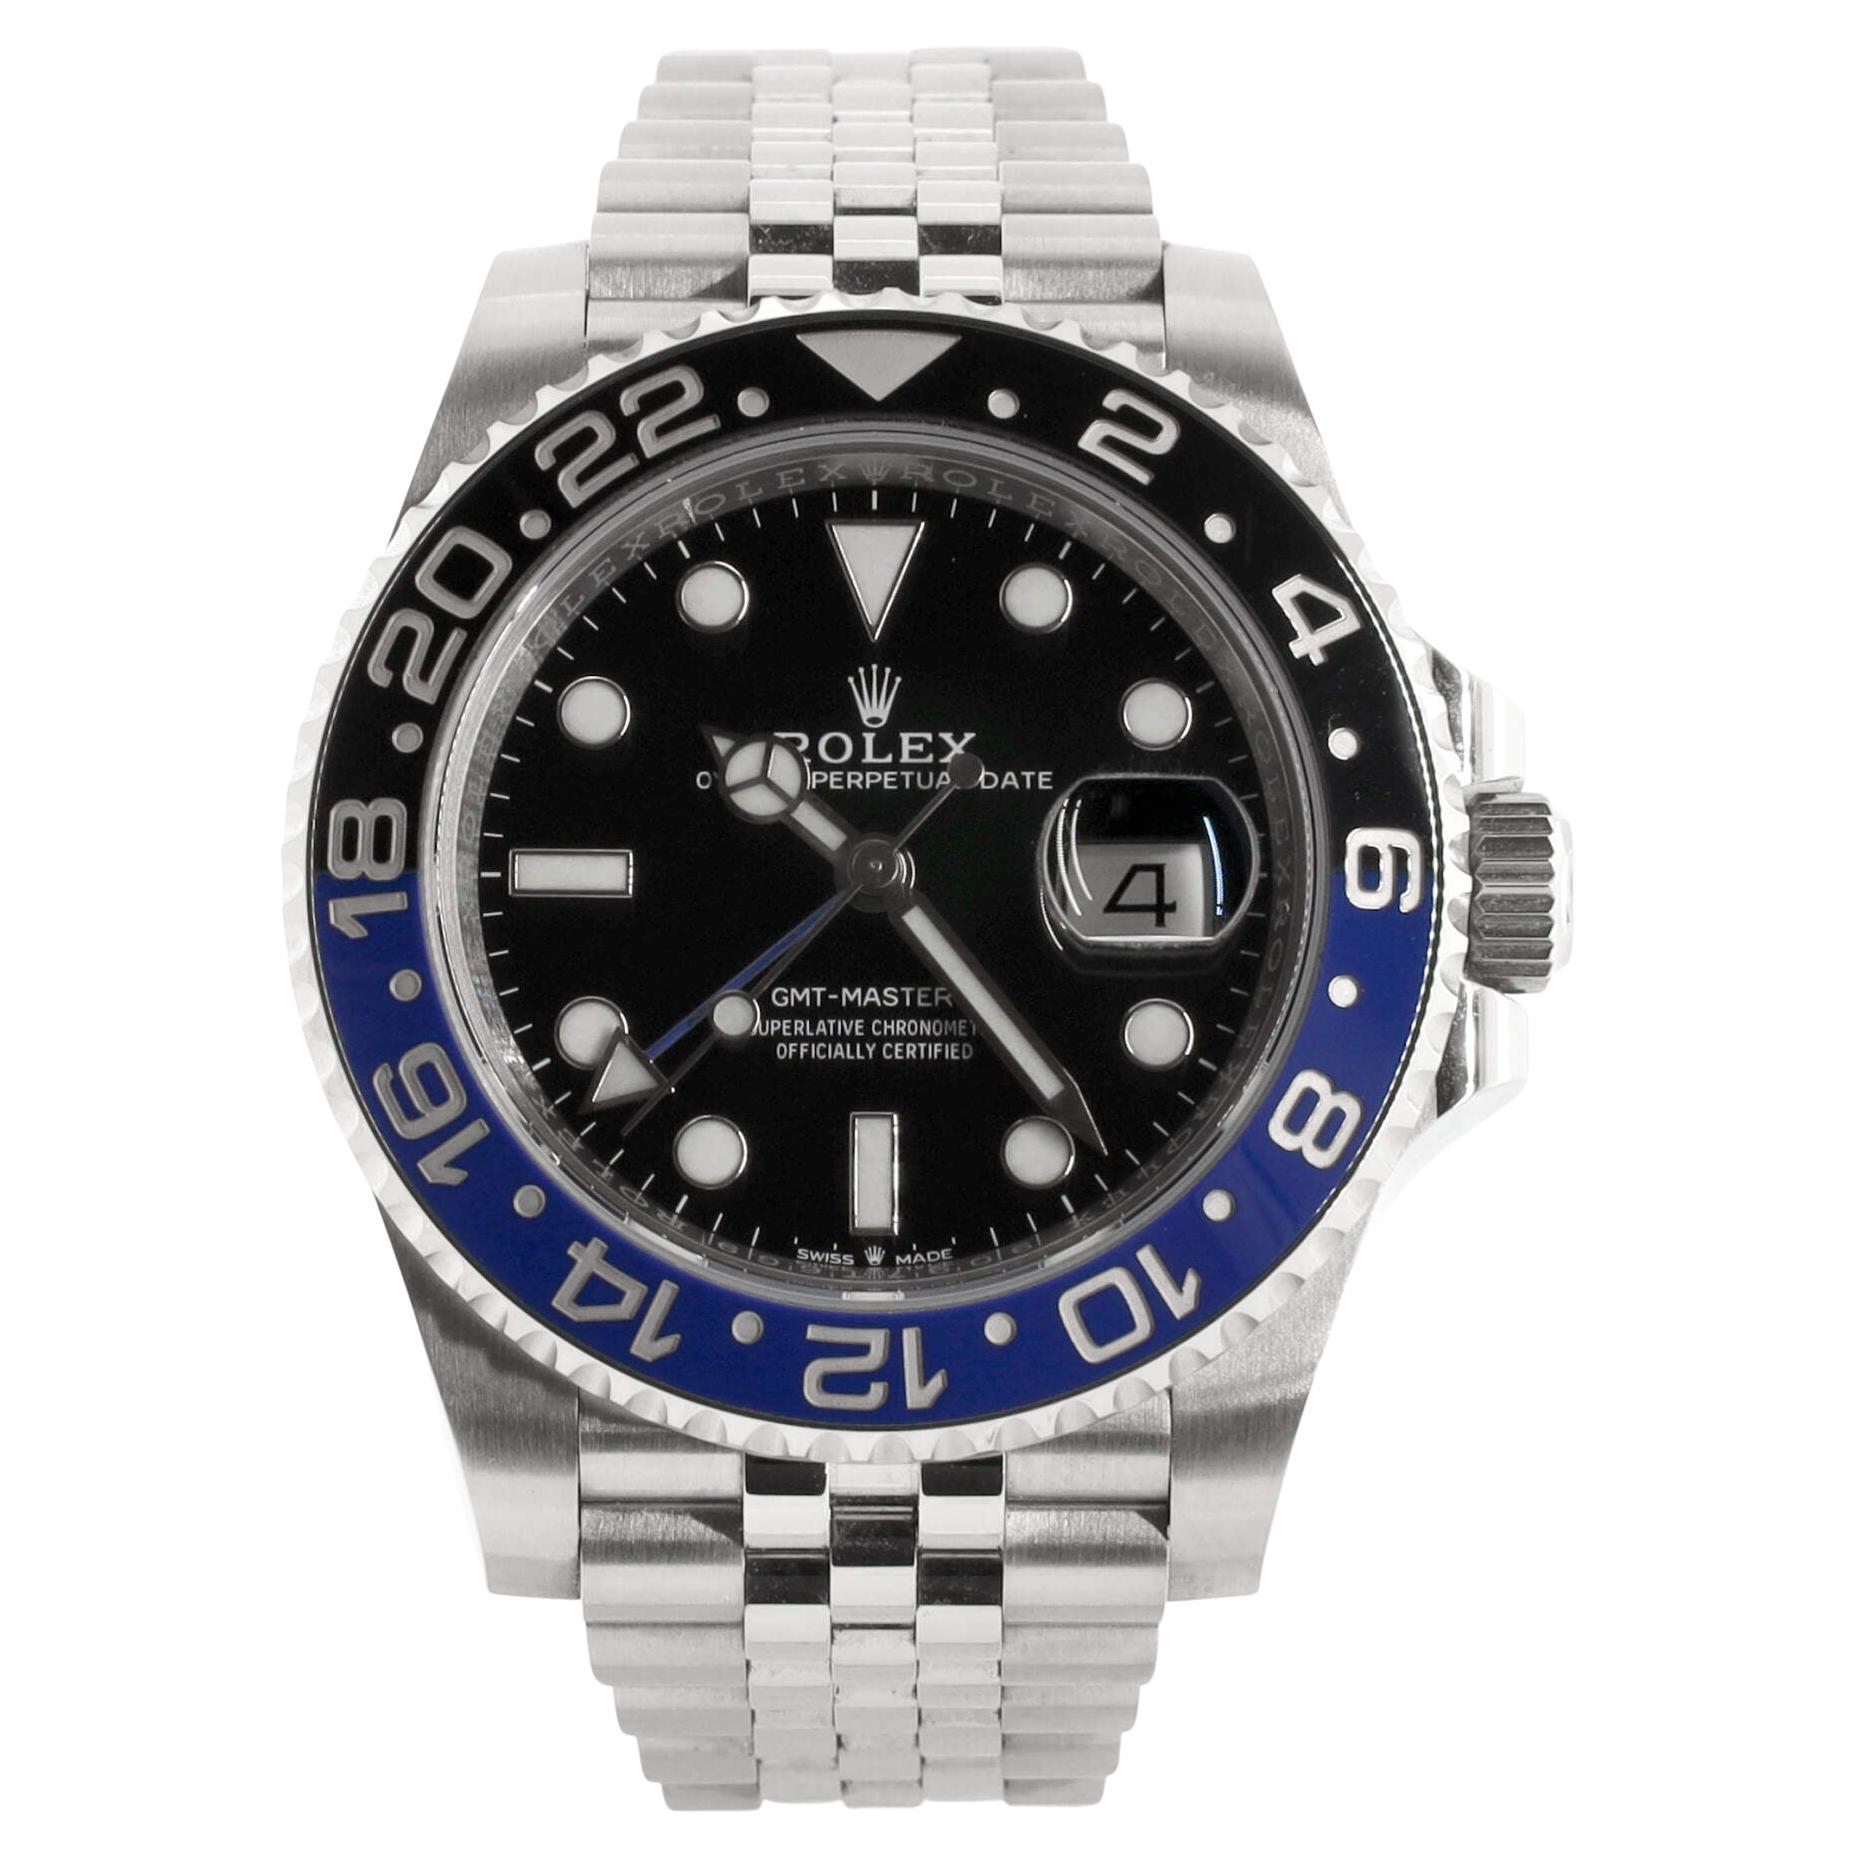 Rolex Oyster Perpetual Date GMT-Master II Batgirl Automatic Watch Stainless For Sale